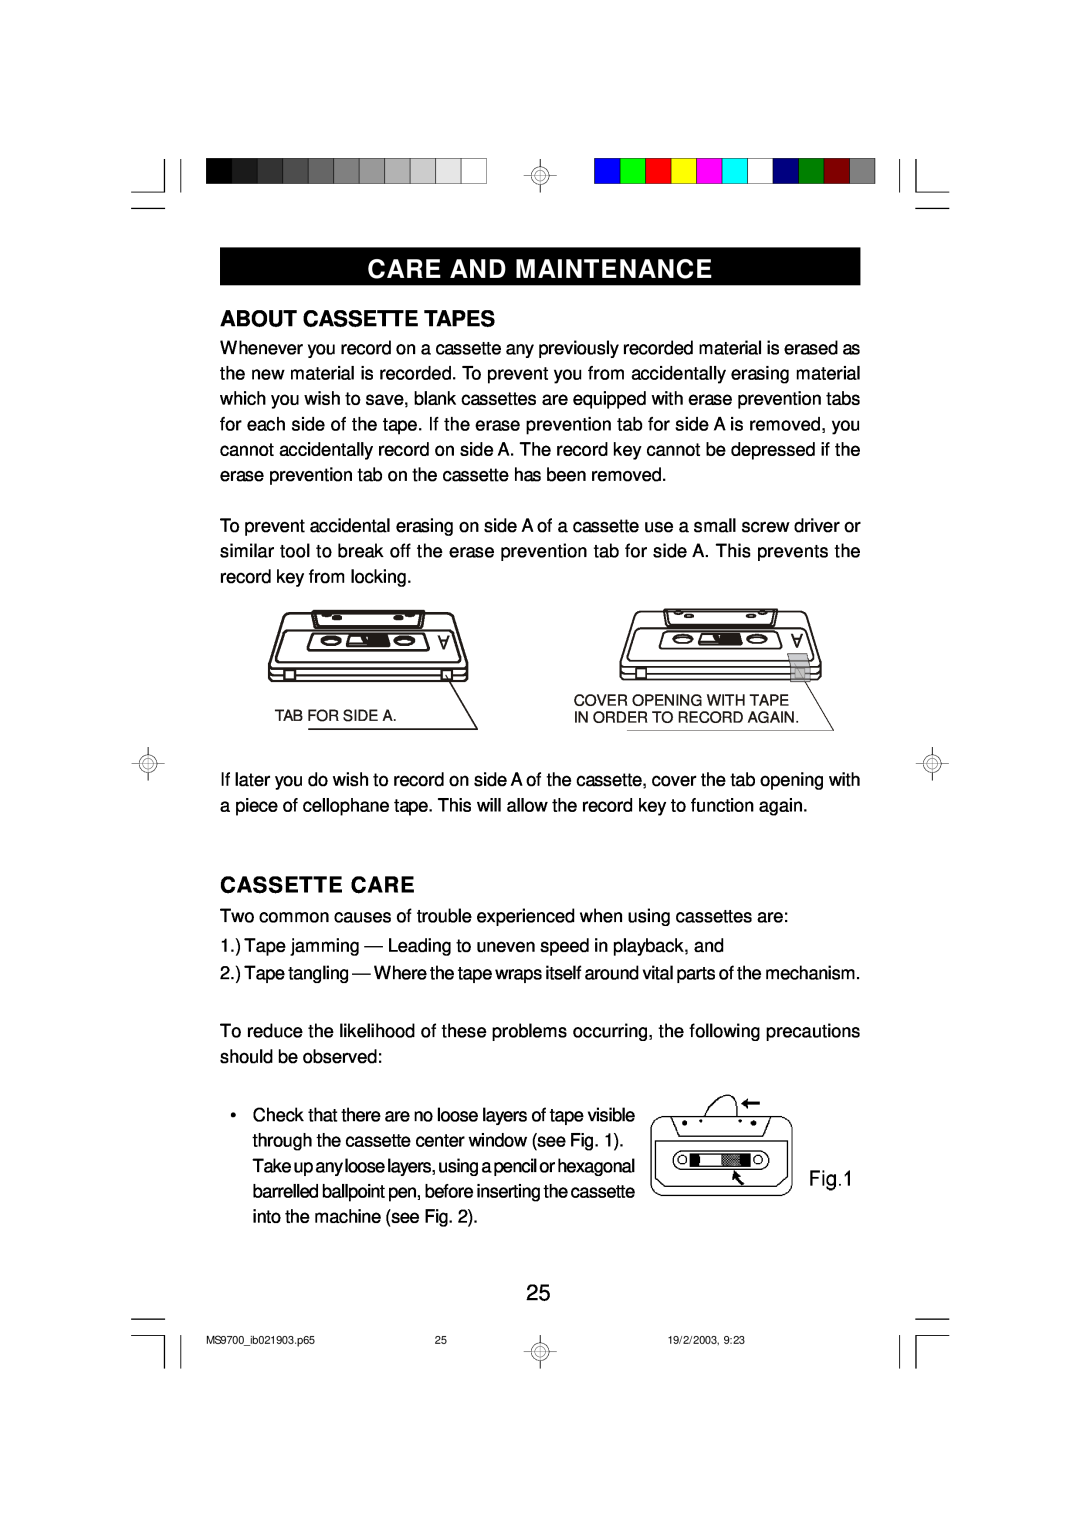 Emerson MS9700 owner manual Care And Maintenance, About Cassette Tapes, Cassette Care 